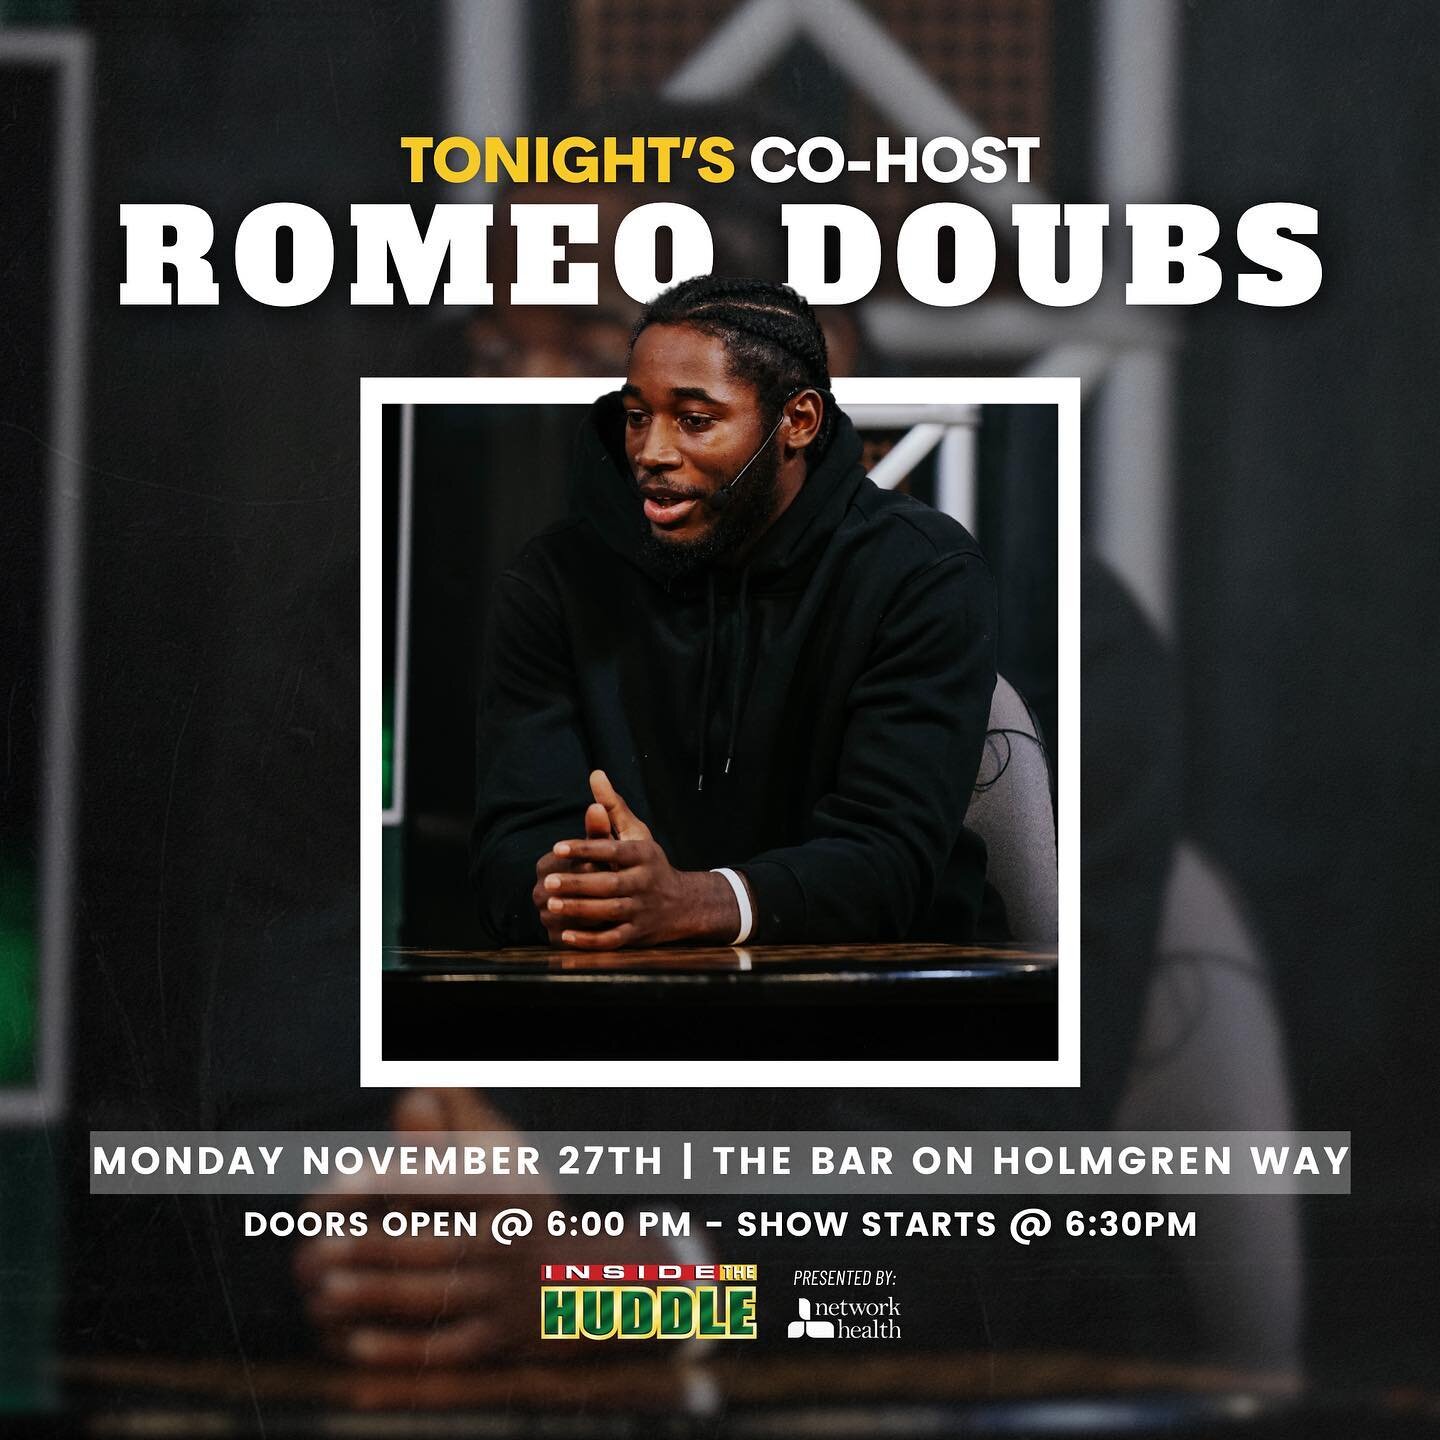 TONIGHT❕ Join us &amp; Romeo Doubs to celebrate Green Bay&rsquo;s BIG win on Thanksgiving 🏈

We will be live from @thebarholmgrenway tonight at 6:30 🎥

Doors open at 6pm and admission is FREE 🎟️